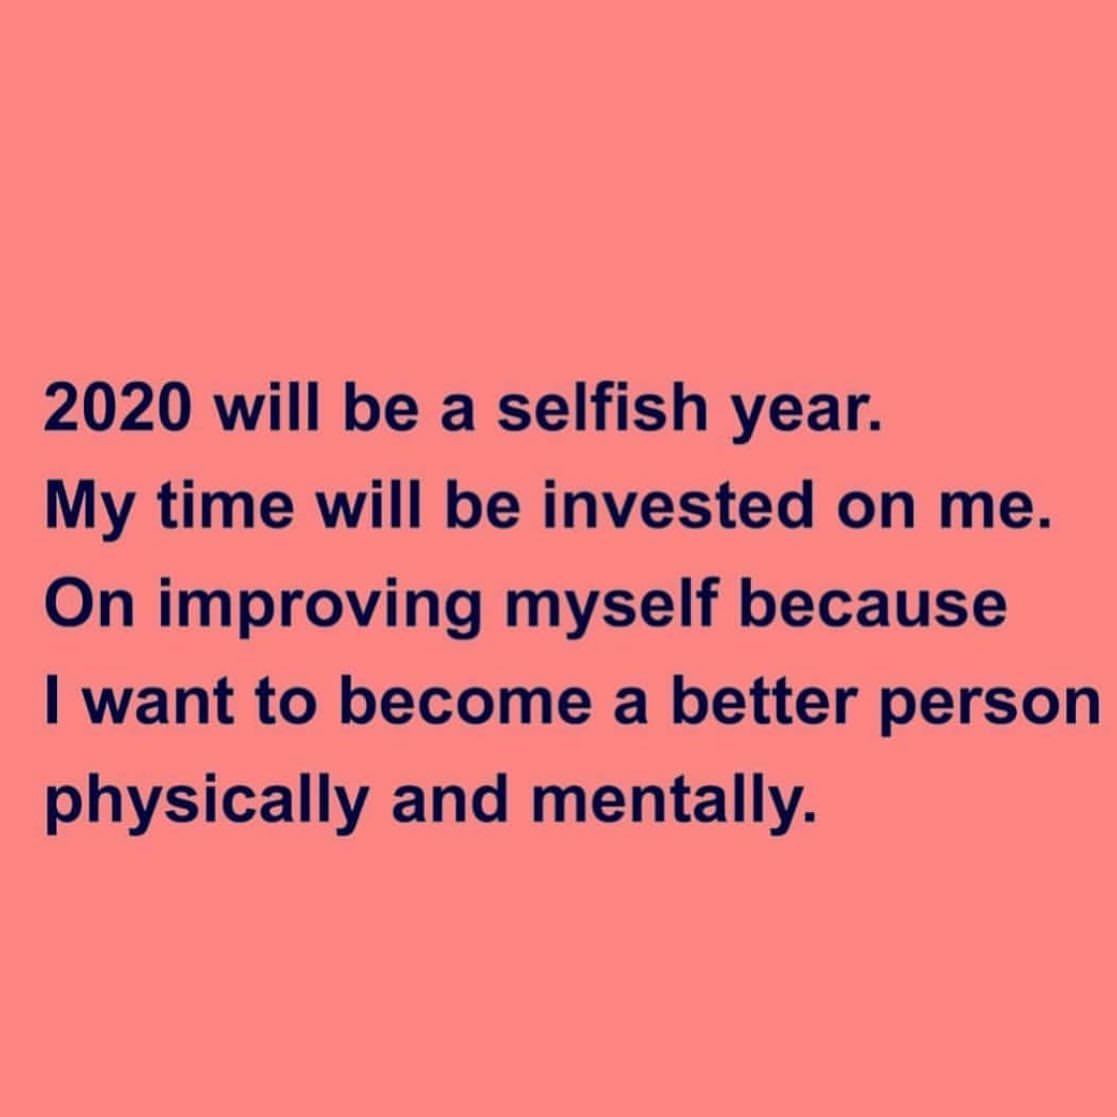 2020 will be a selfish year. My time will be invested on me. On improving myself because I want to become a better person physically and mentally.